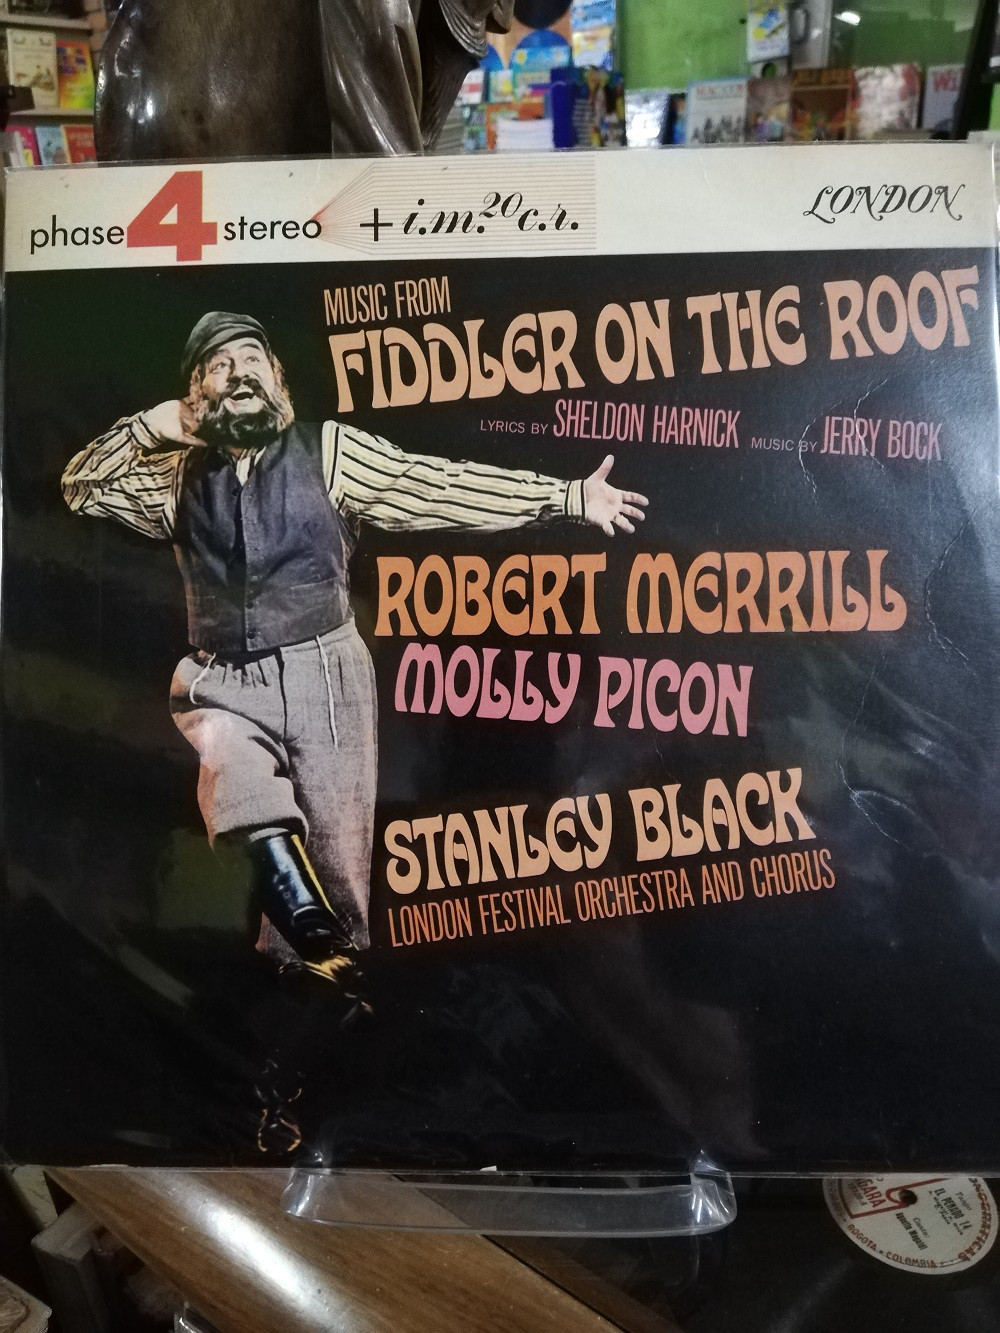 Imagen LP MUSIC FROM FIDDLER ON THE ROOF - STANLEY BLACK LONDON FESTIVAL ORCHESTRA AND CHORUS 1